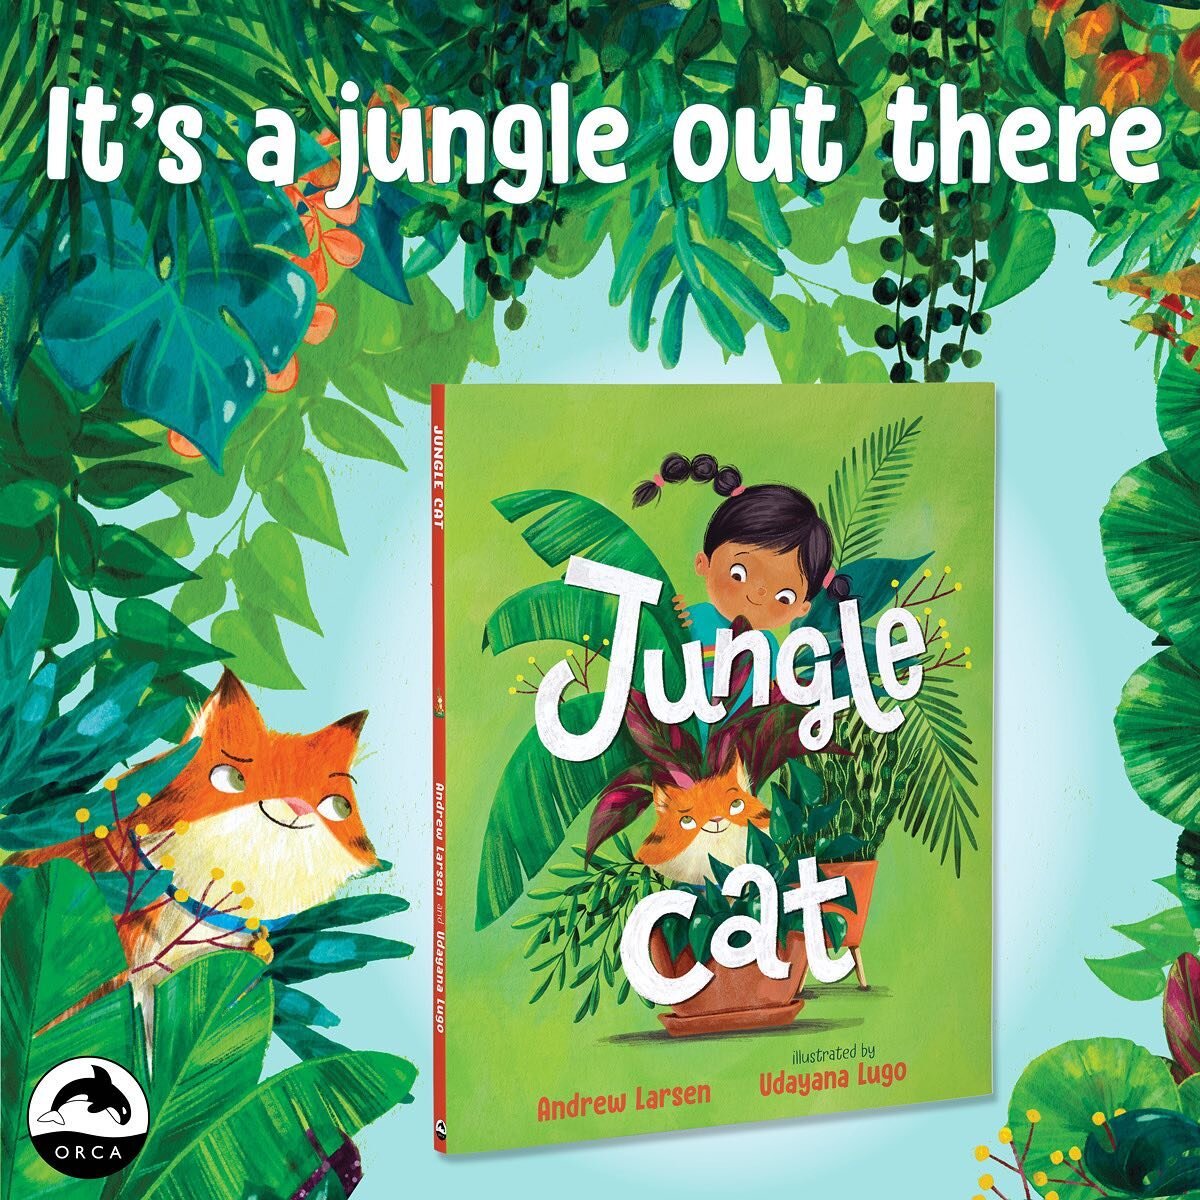 Happy weekend! I&rsquo;m super excited that Jungle Cat is only a month and a half away! 
Link in bio to preorder 😉
Thank you @orcabook for sending this promo images, aren&rsquo;t they cute?

#JungleCat #picturebook #picturebookillustration #kidlitar